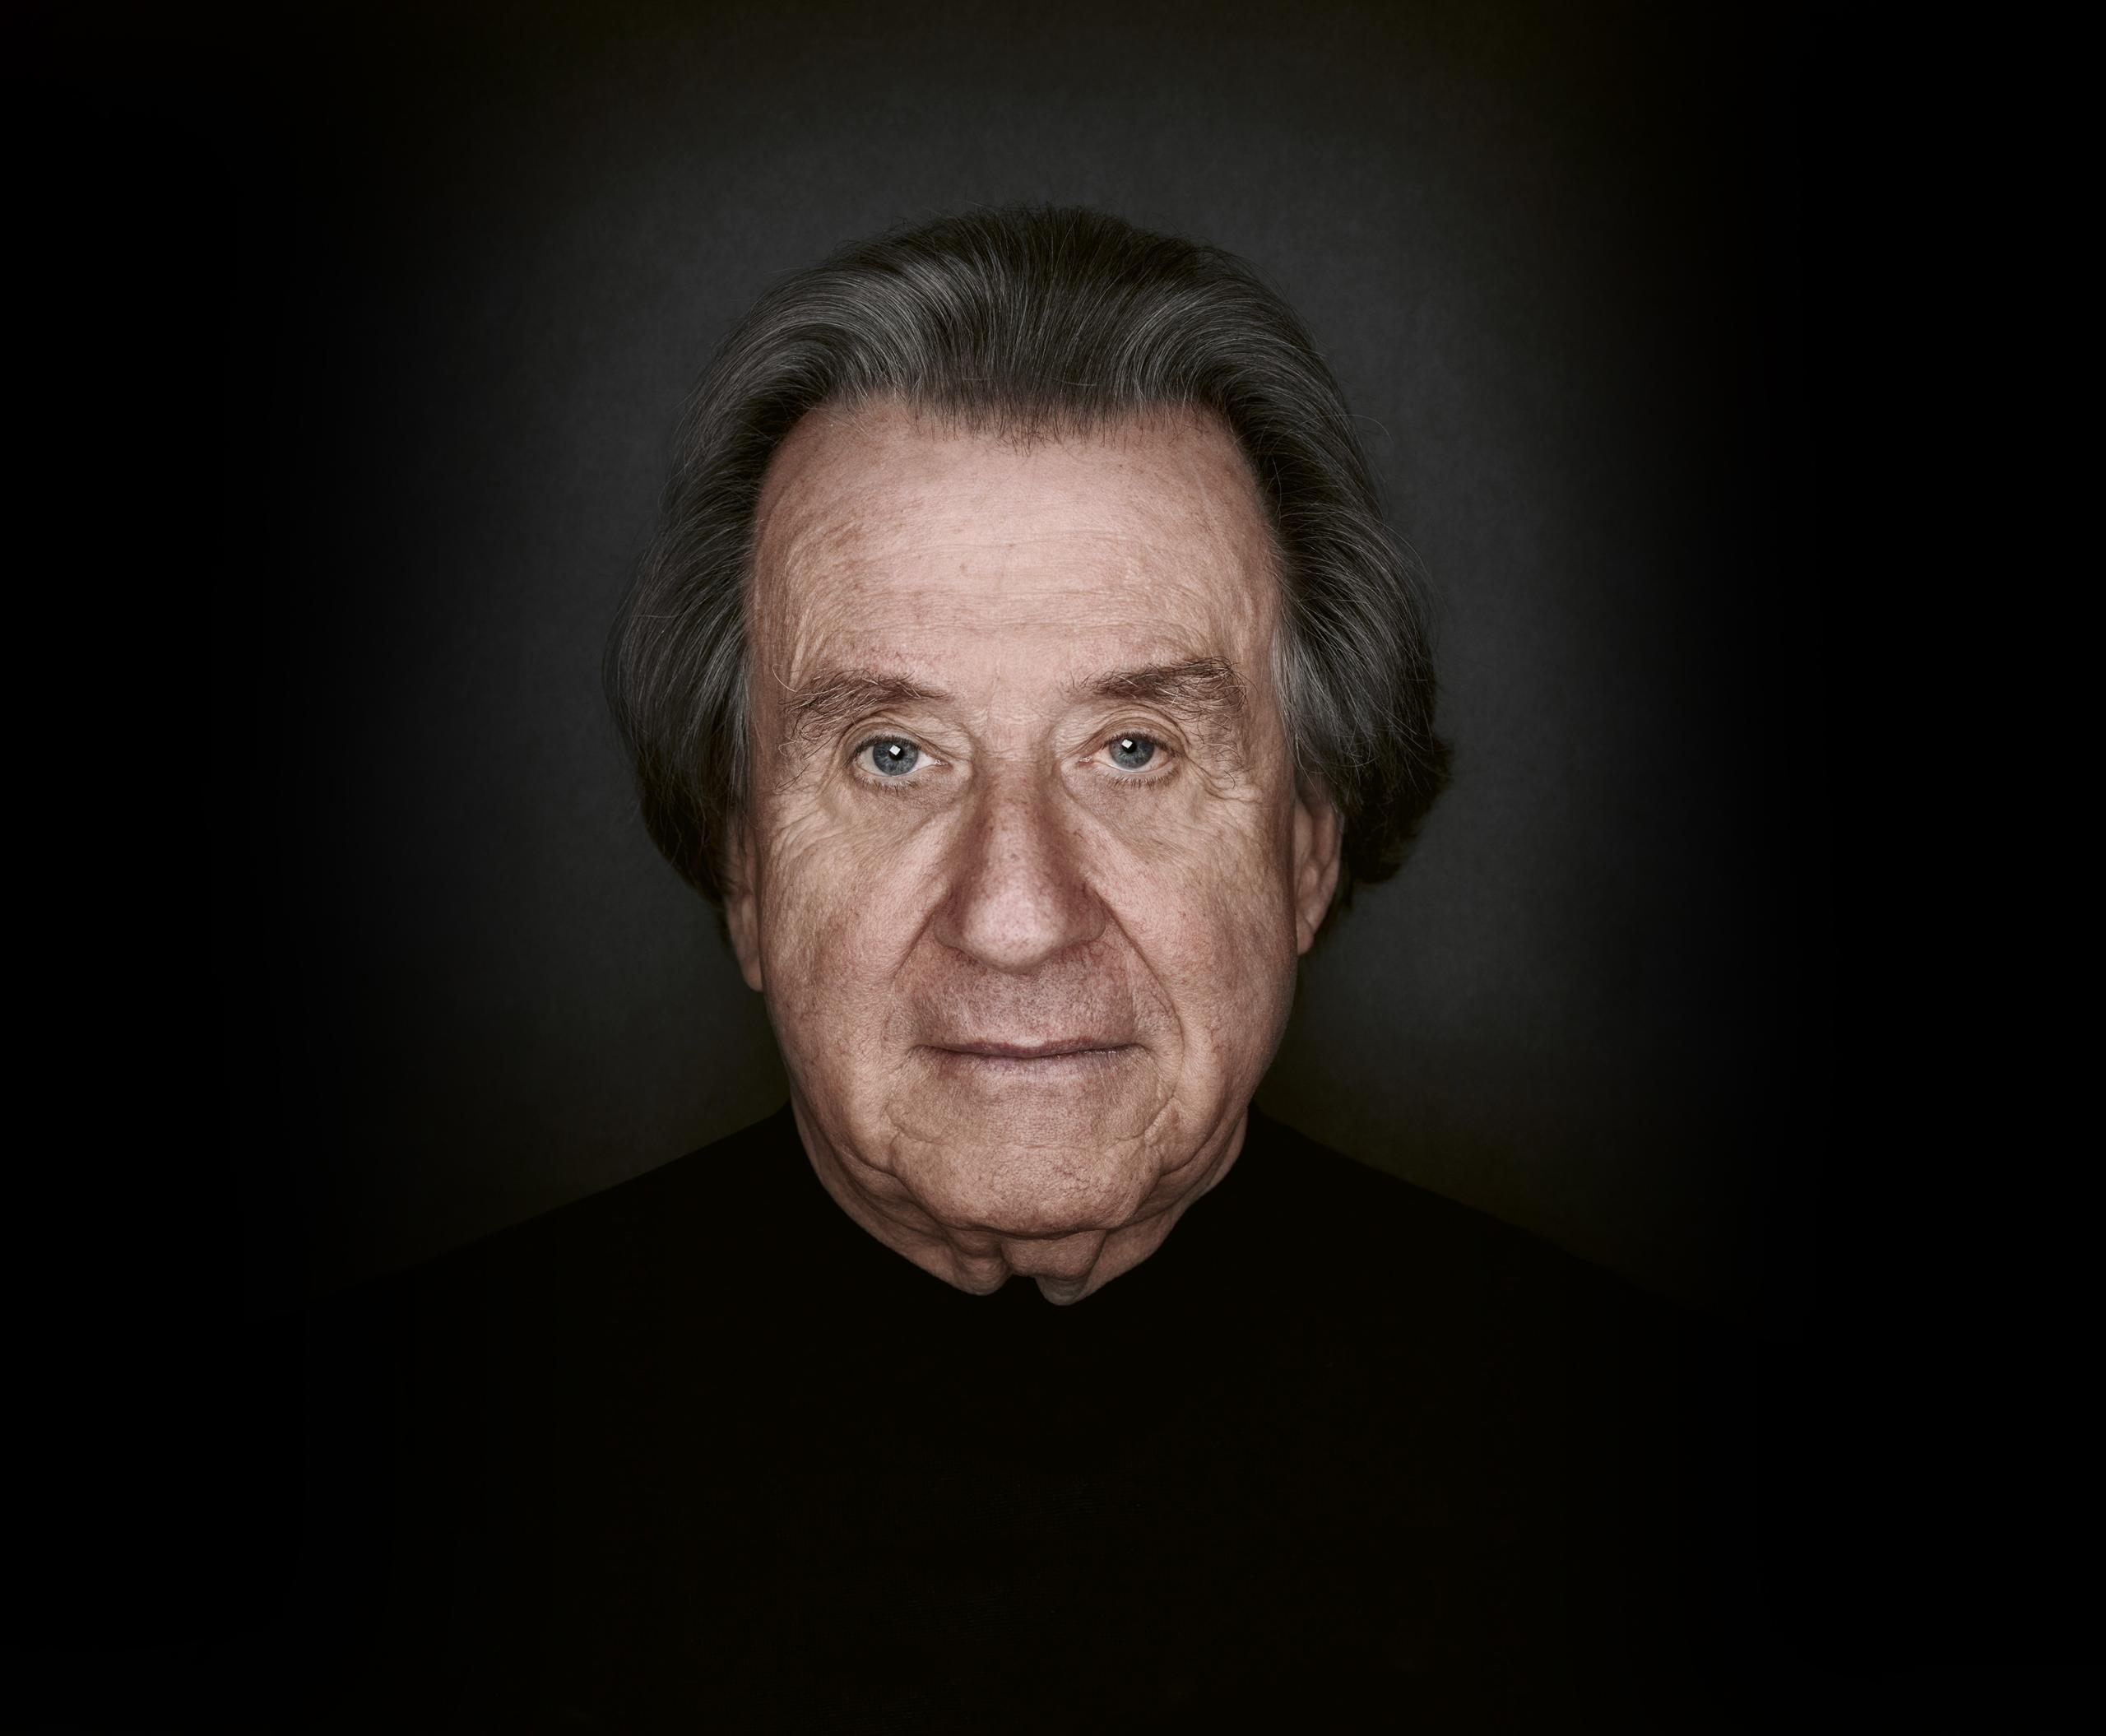 Portrait shot of the pianist Rudolf Buchbinder. In front of a dark background he looks directly into the camera.